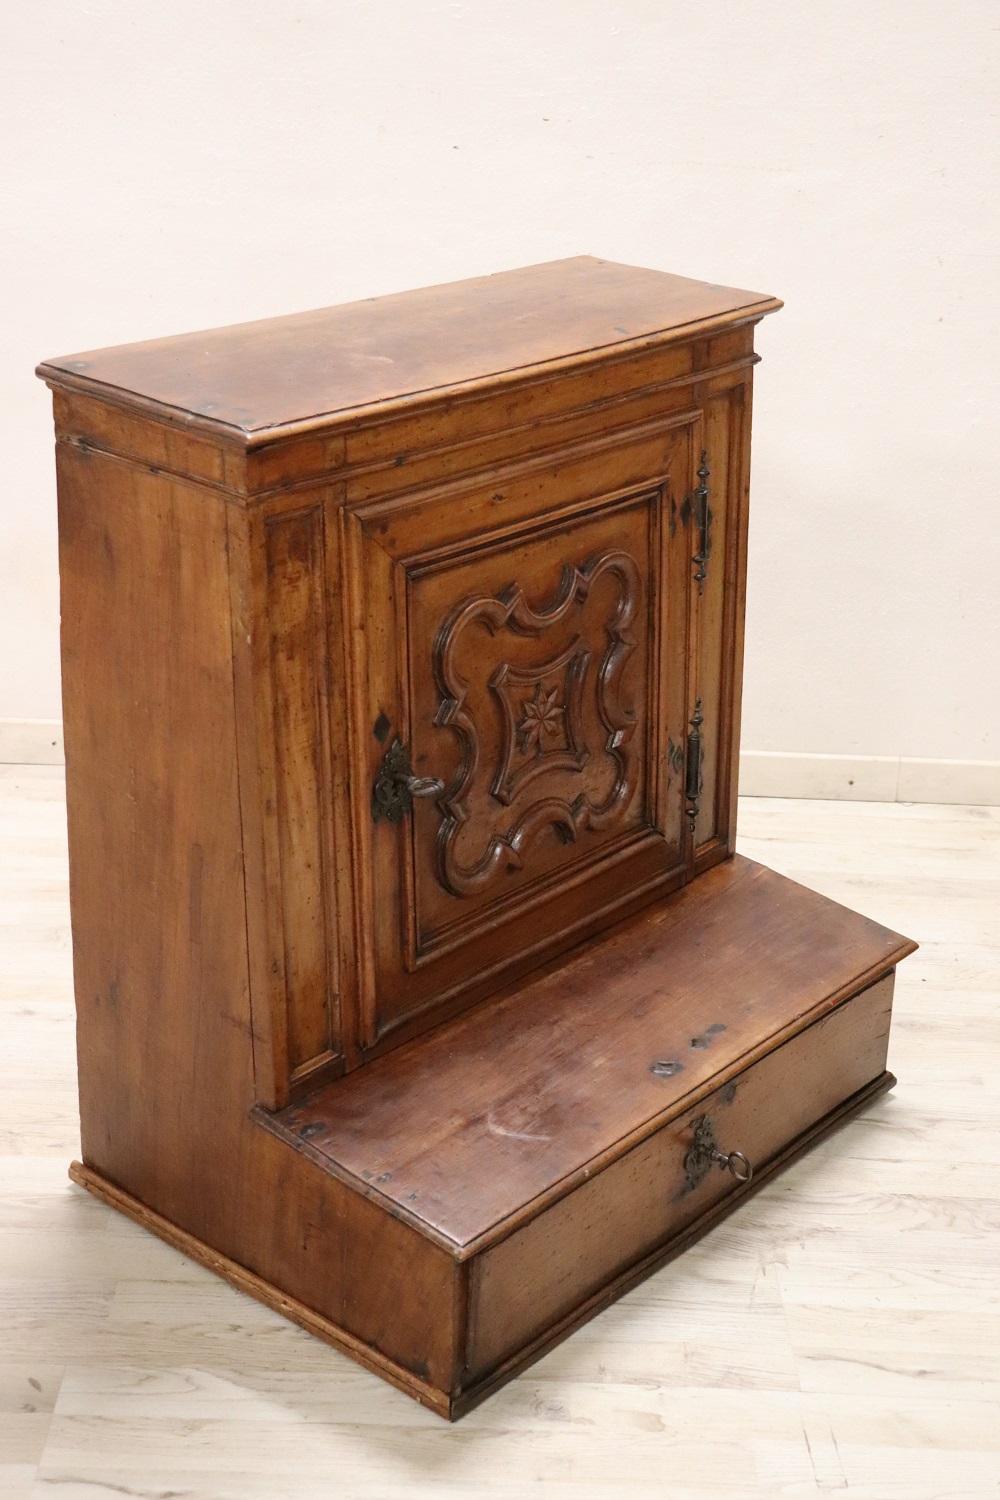 Rare antique Italian kneeler, Mid-17th Century Louis XIV. Made of solid walnut with relief decoration carved into the wood. In the part dedicated to the knees there is a compartment. Of great value all the hand forged iron part of the escutcheons